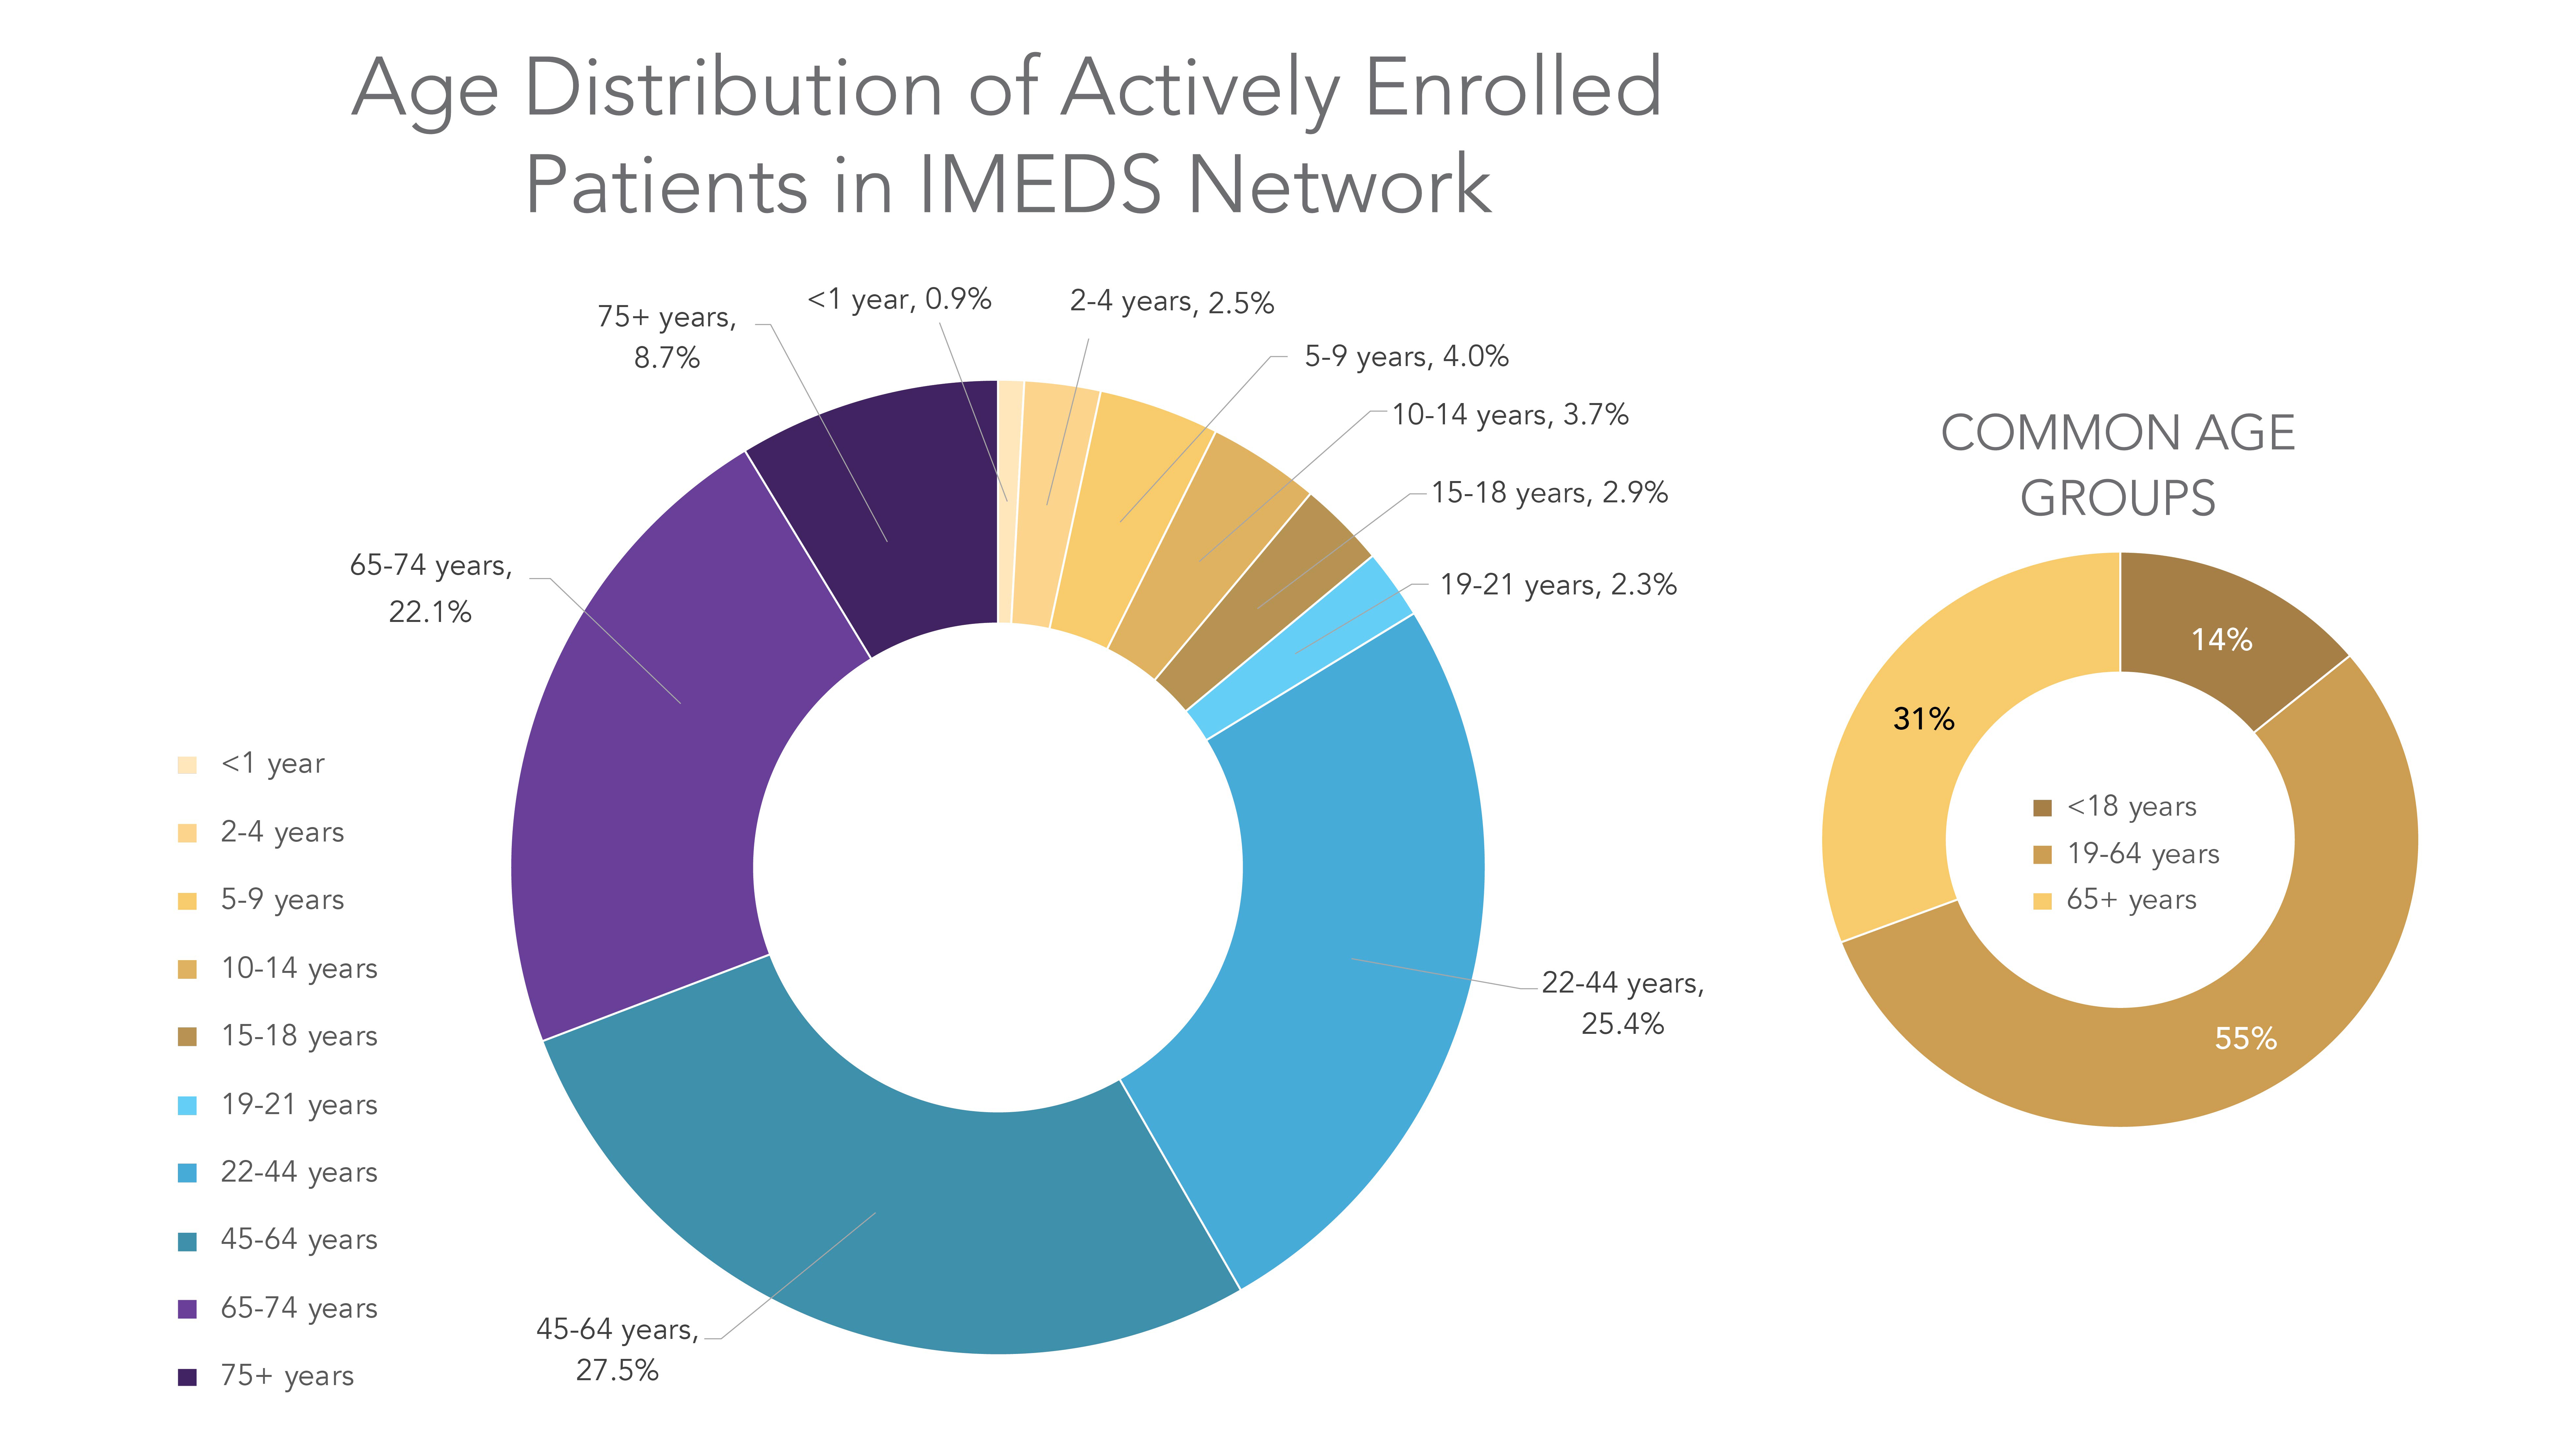 Age Distribution Actively Enrolled Patients IMEDS Network